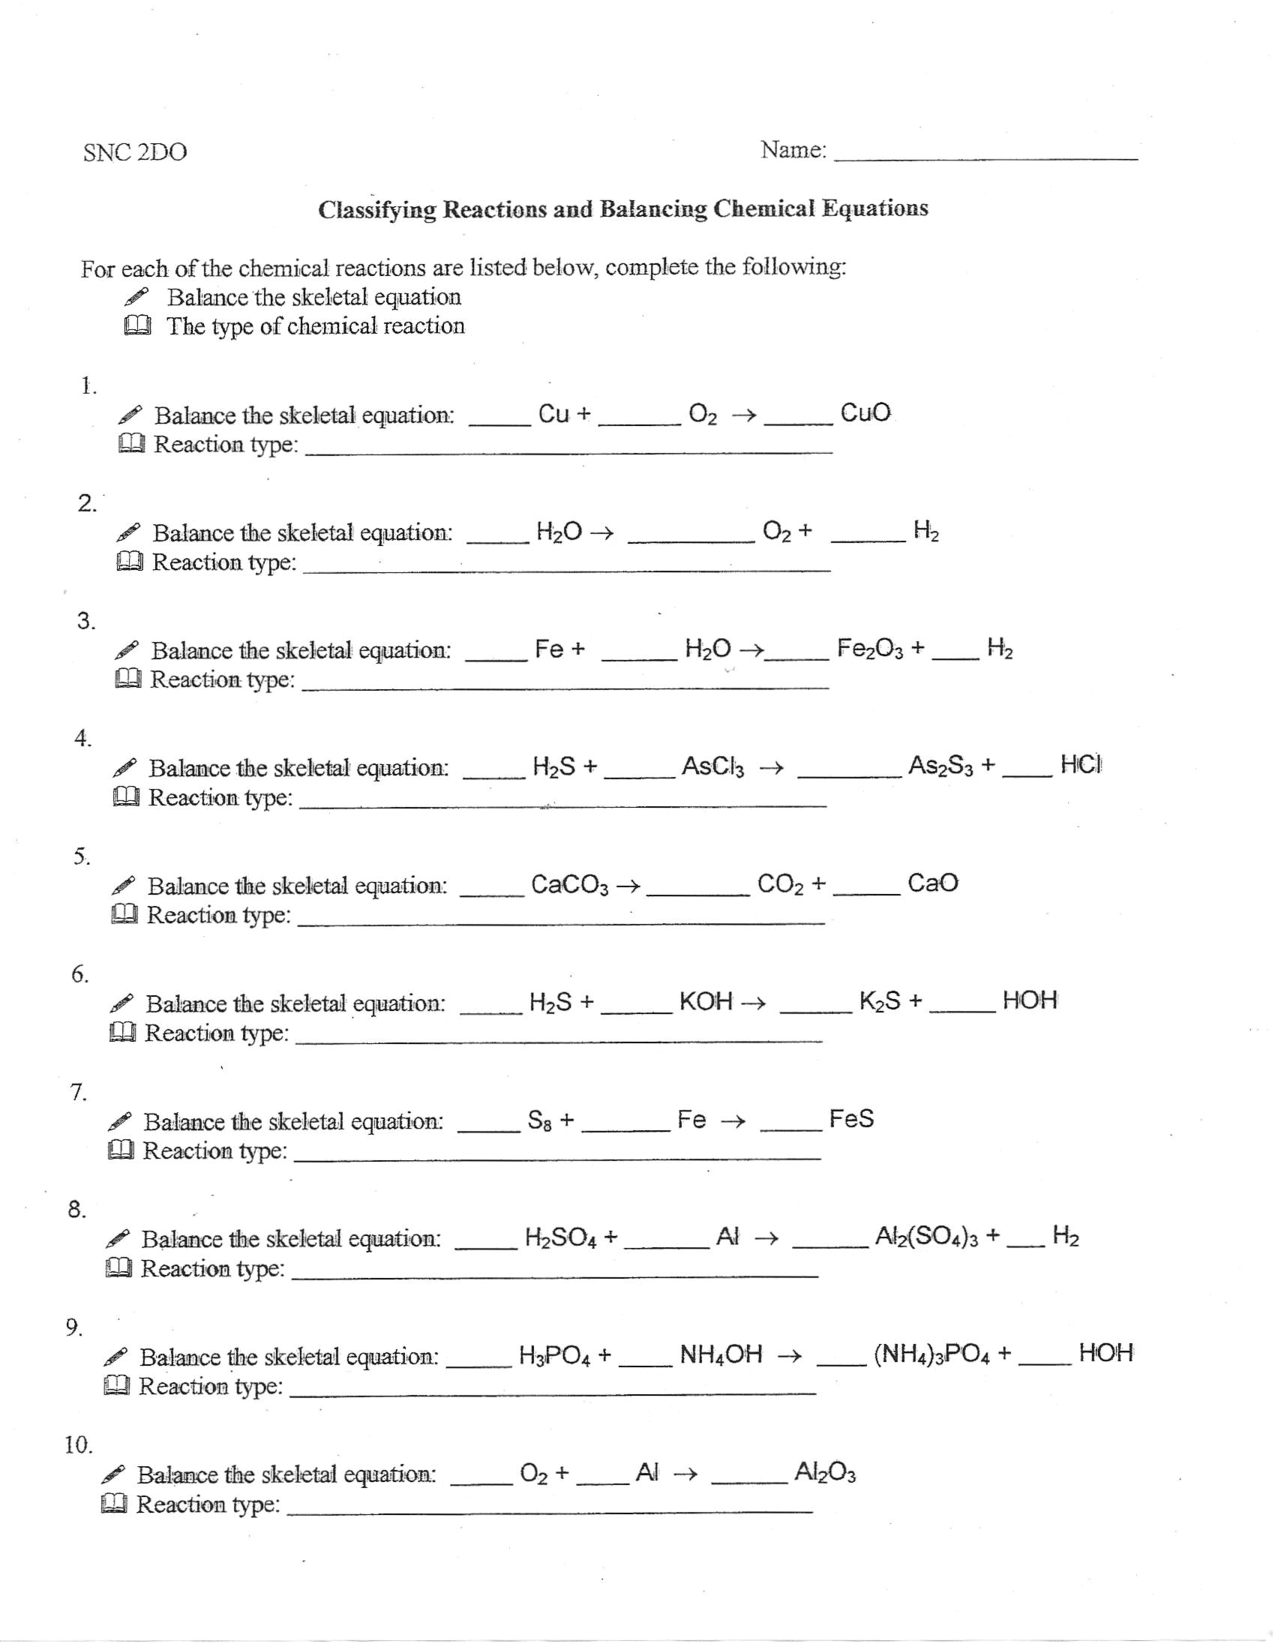 15 Best Images of Types Of Reactions Worksheet Answer Key Virtual Lab